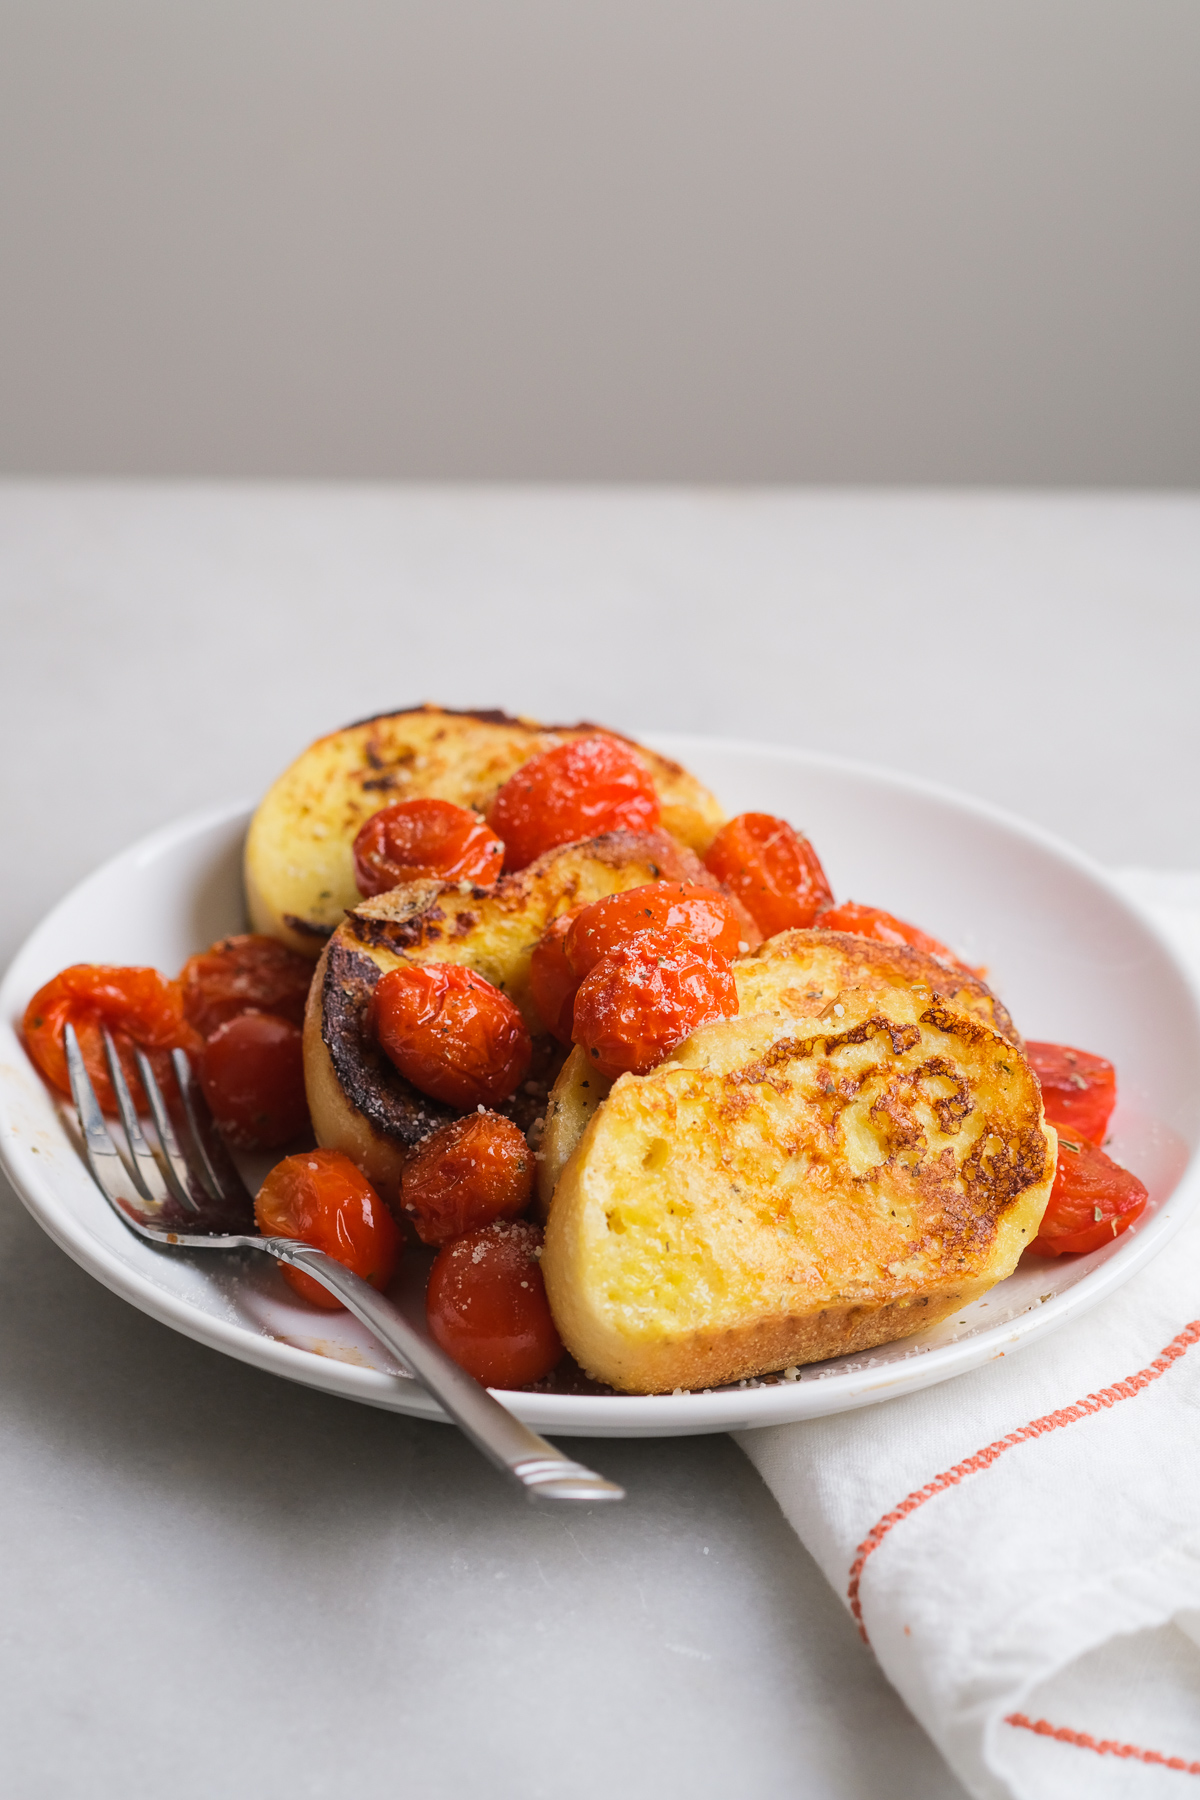 roasted cherry tomatoes on top of savory french toast